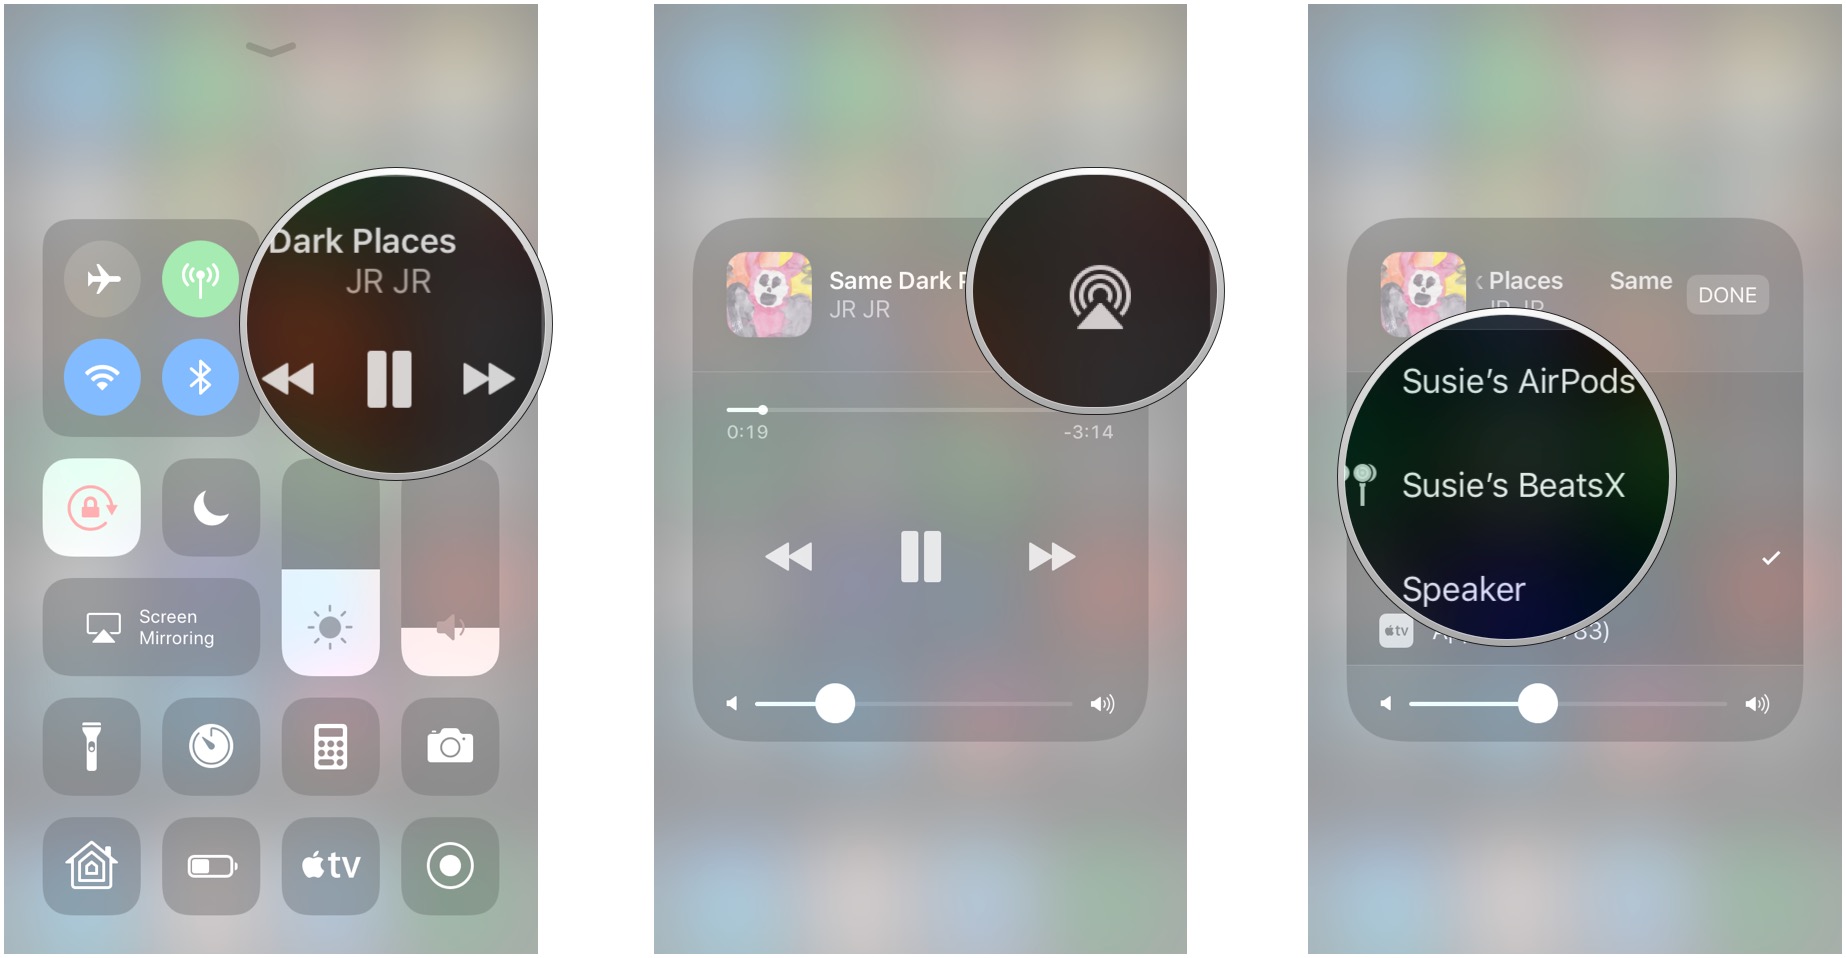 Swipe up from the Home screen to open Control Center, tap the upper right module, 3D Touch or long press the upper right module, tap the AirPlay button, tap the device you want to AirPlay to